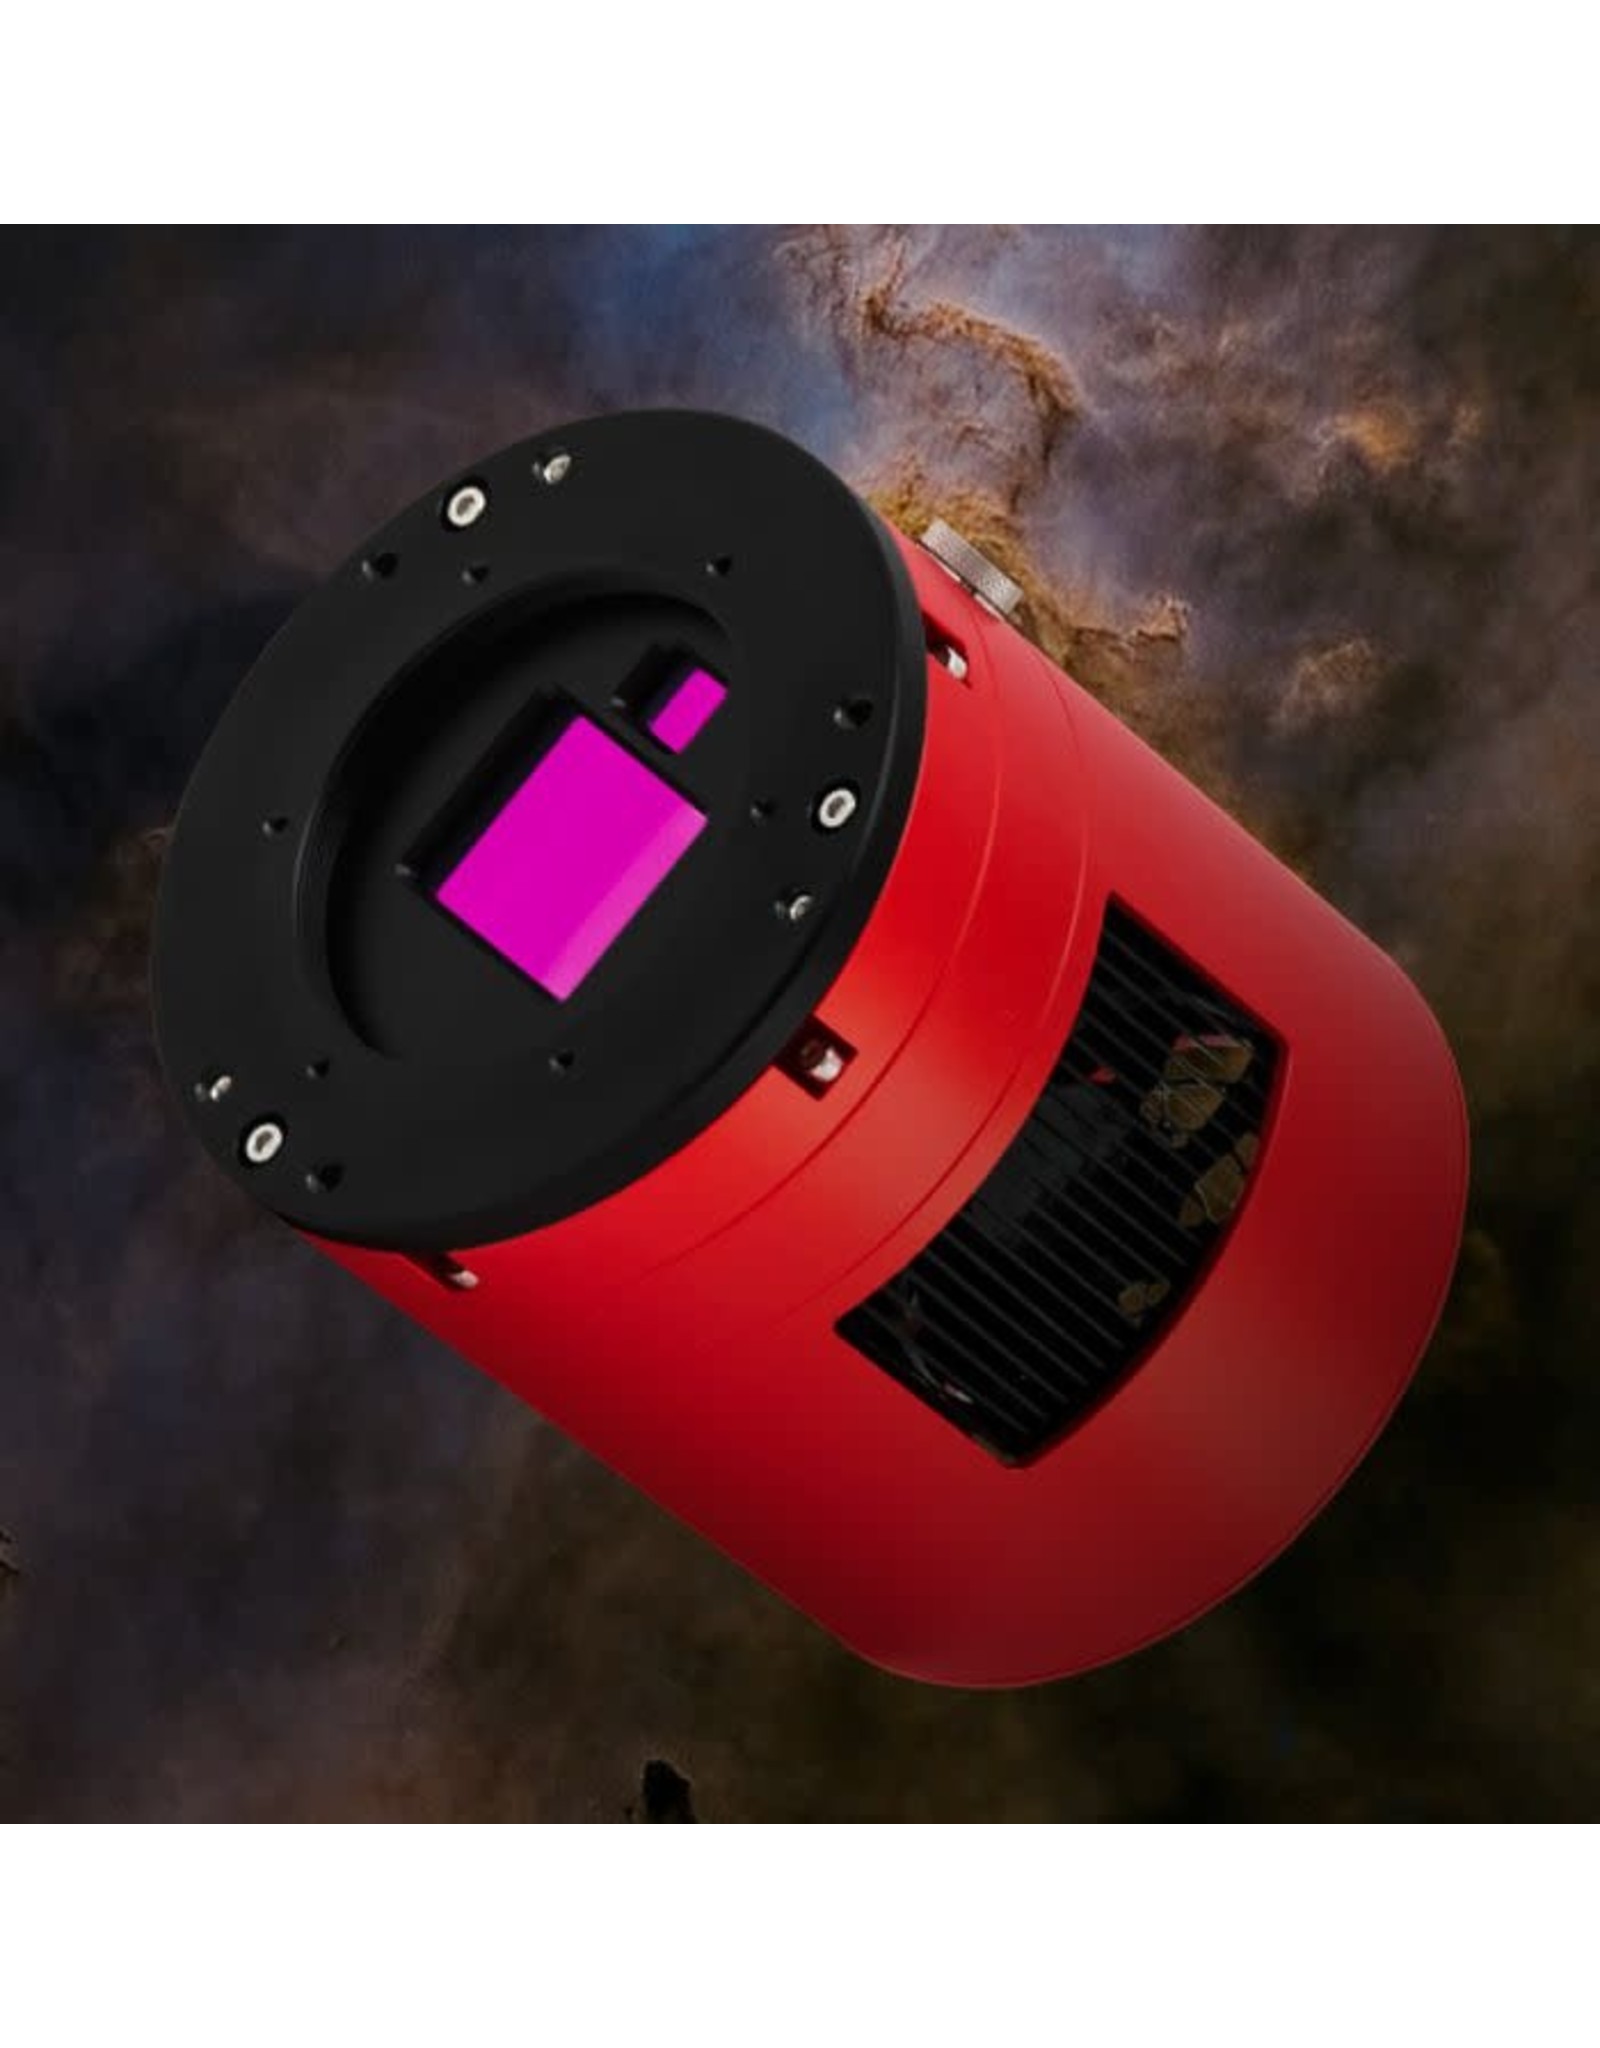 ZWO ZWO ASI2600MC DUO Astronomy Camera with built in Guider